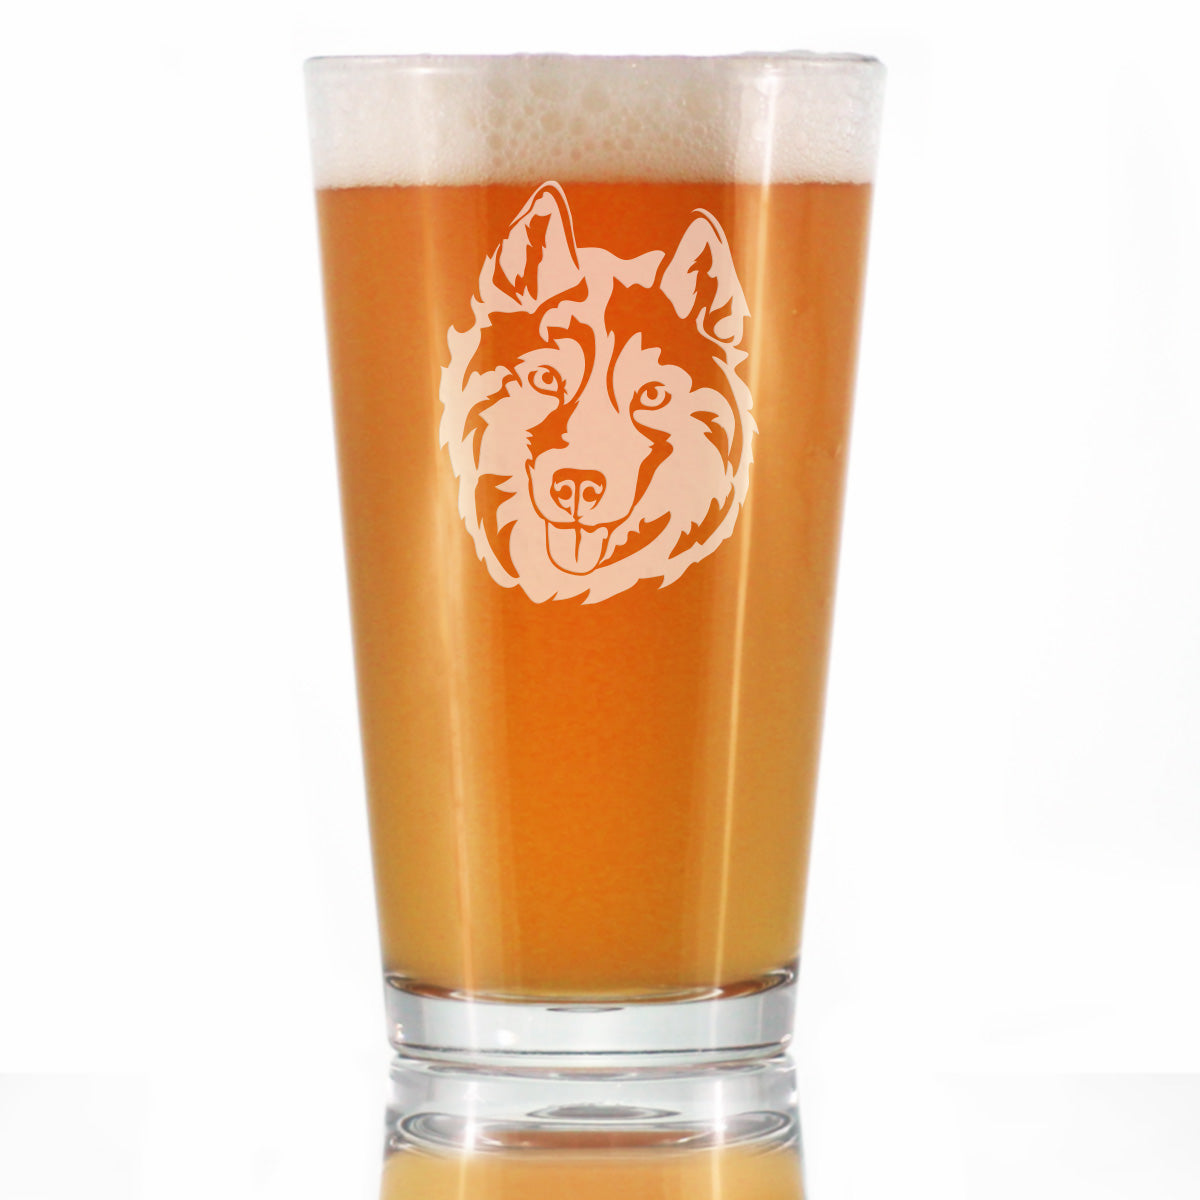 Siberian Husky Face Pint Glass for Beer - Unique Dog Themed Decor and Gifts for Moms & Dads of Huskies - 16 Oz